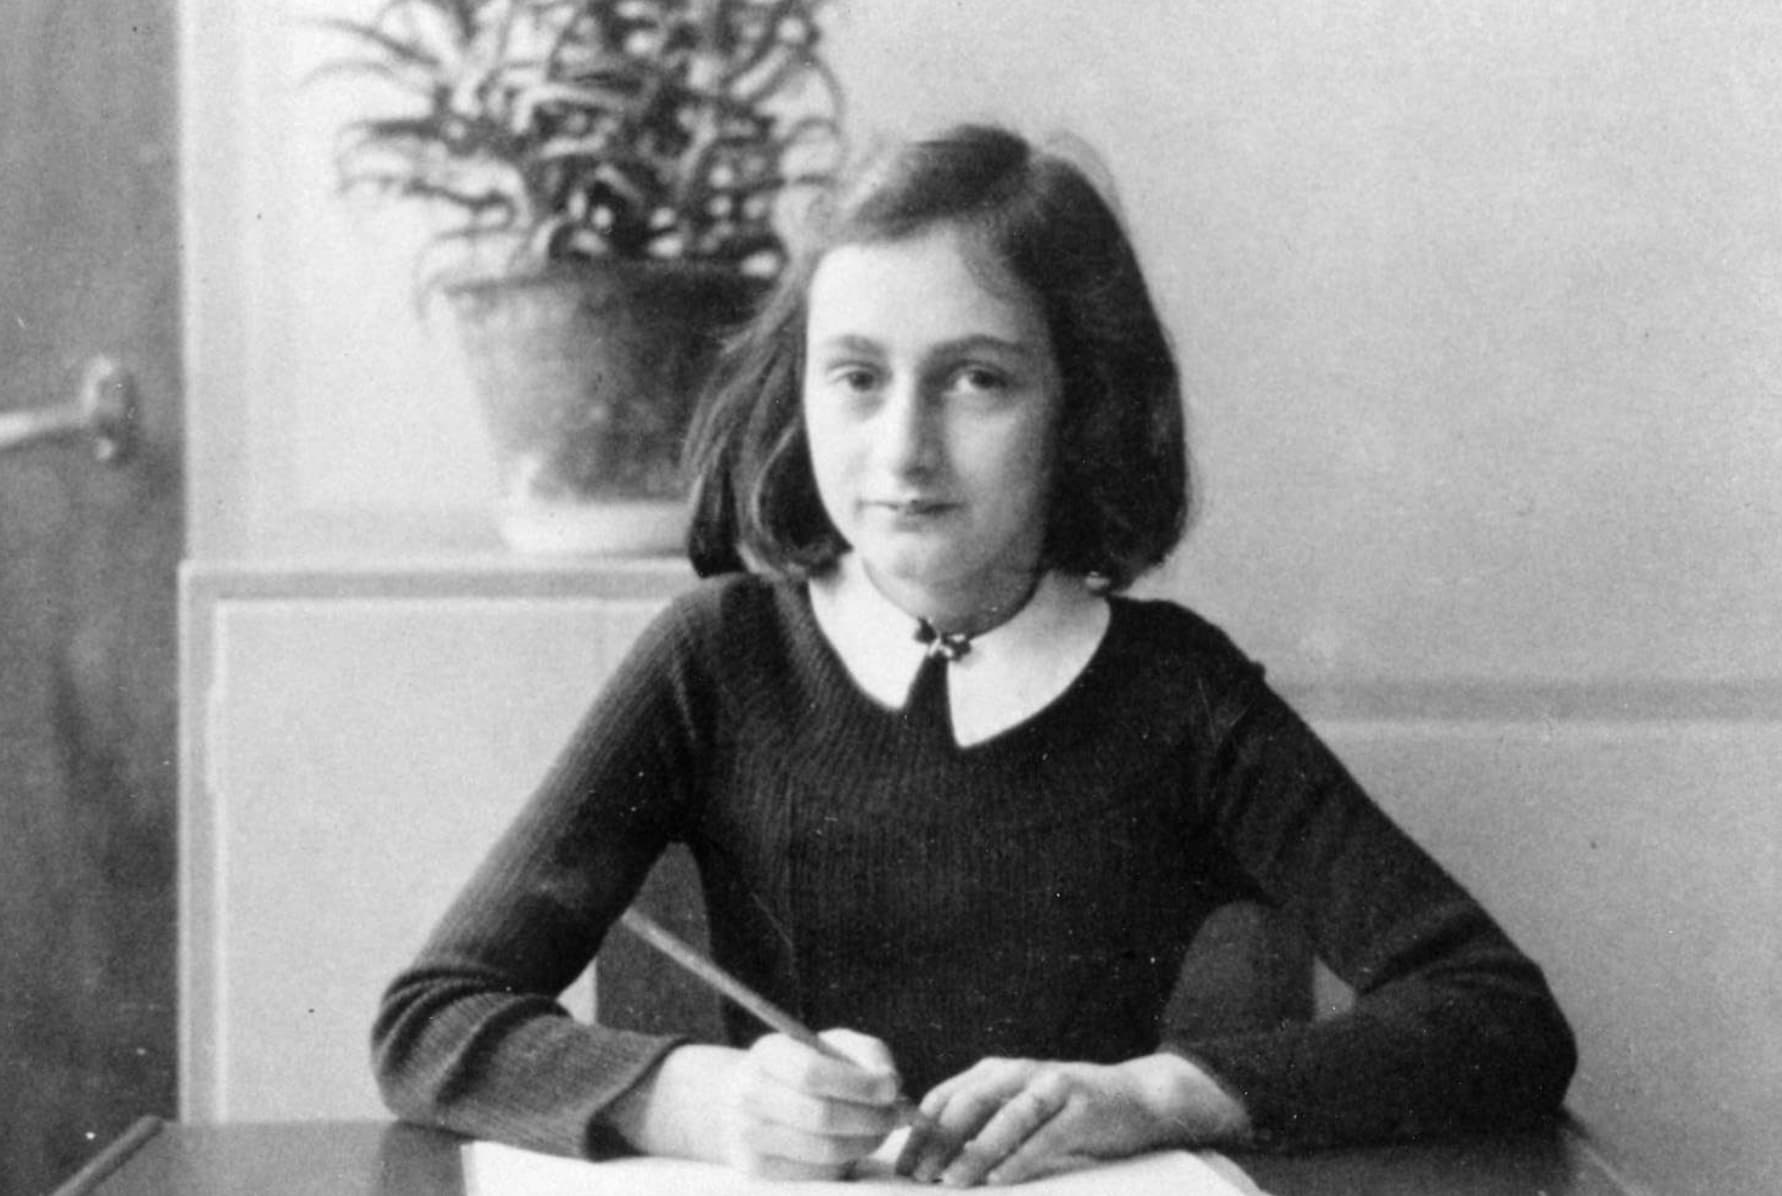 “We don't know who betrayed Anne Frank's hiding place and led to her death.”